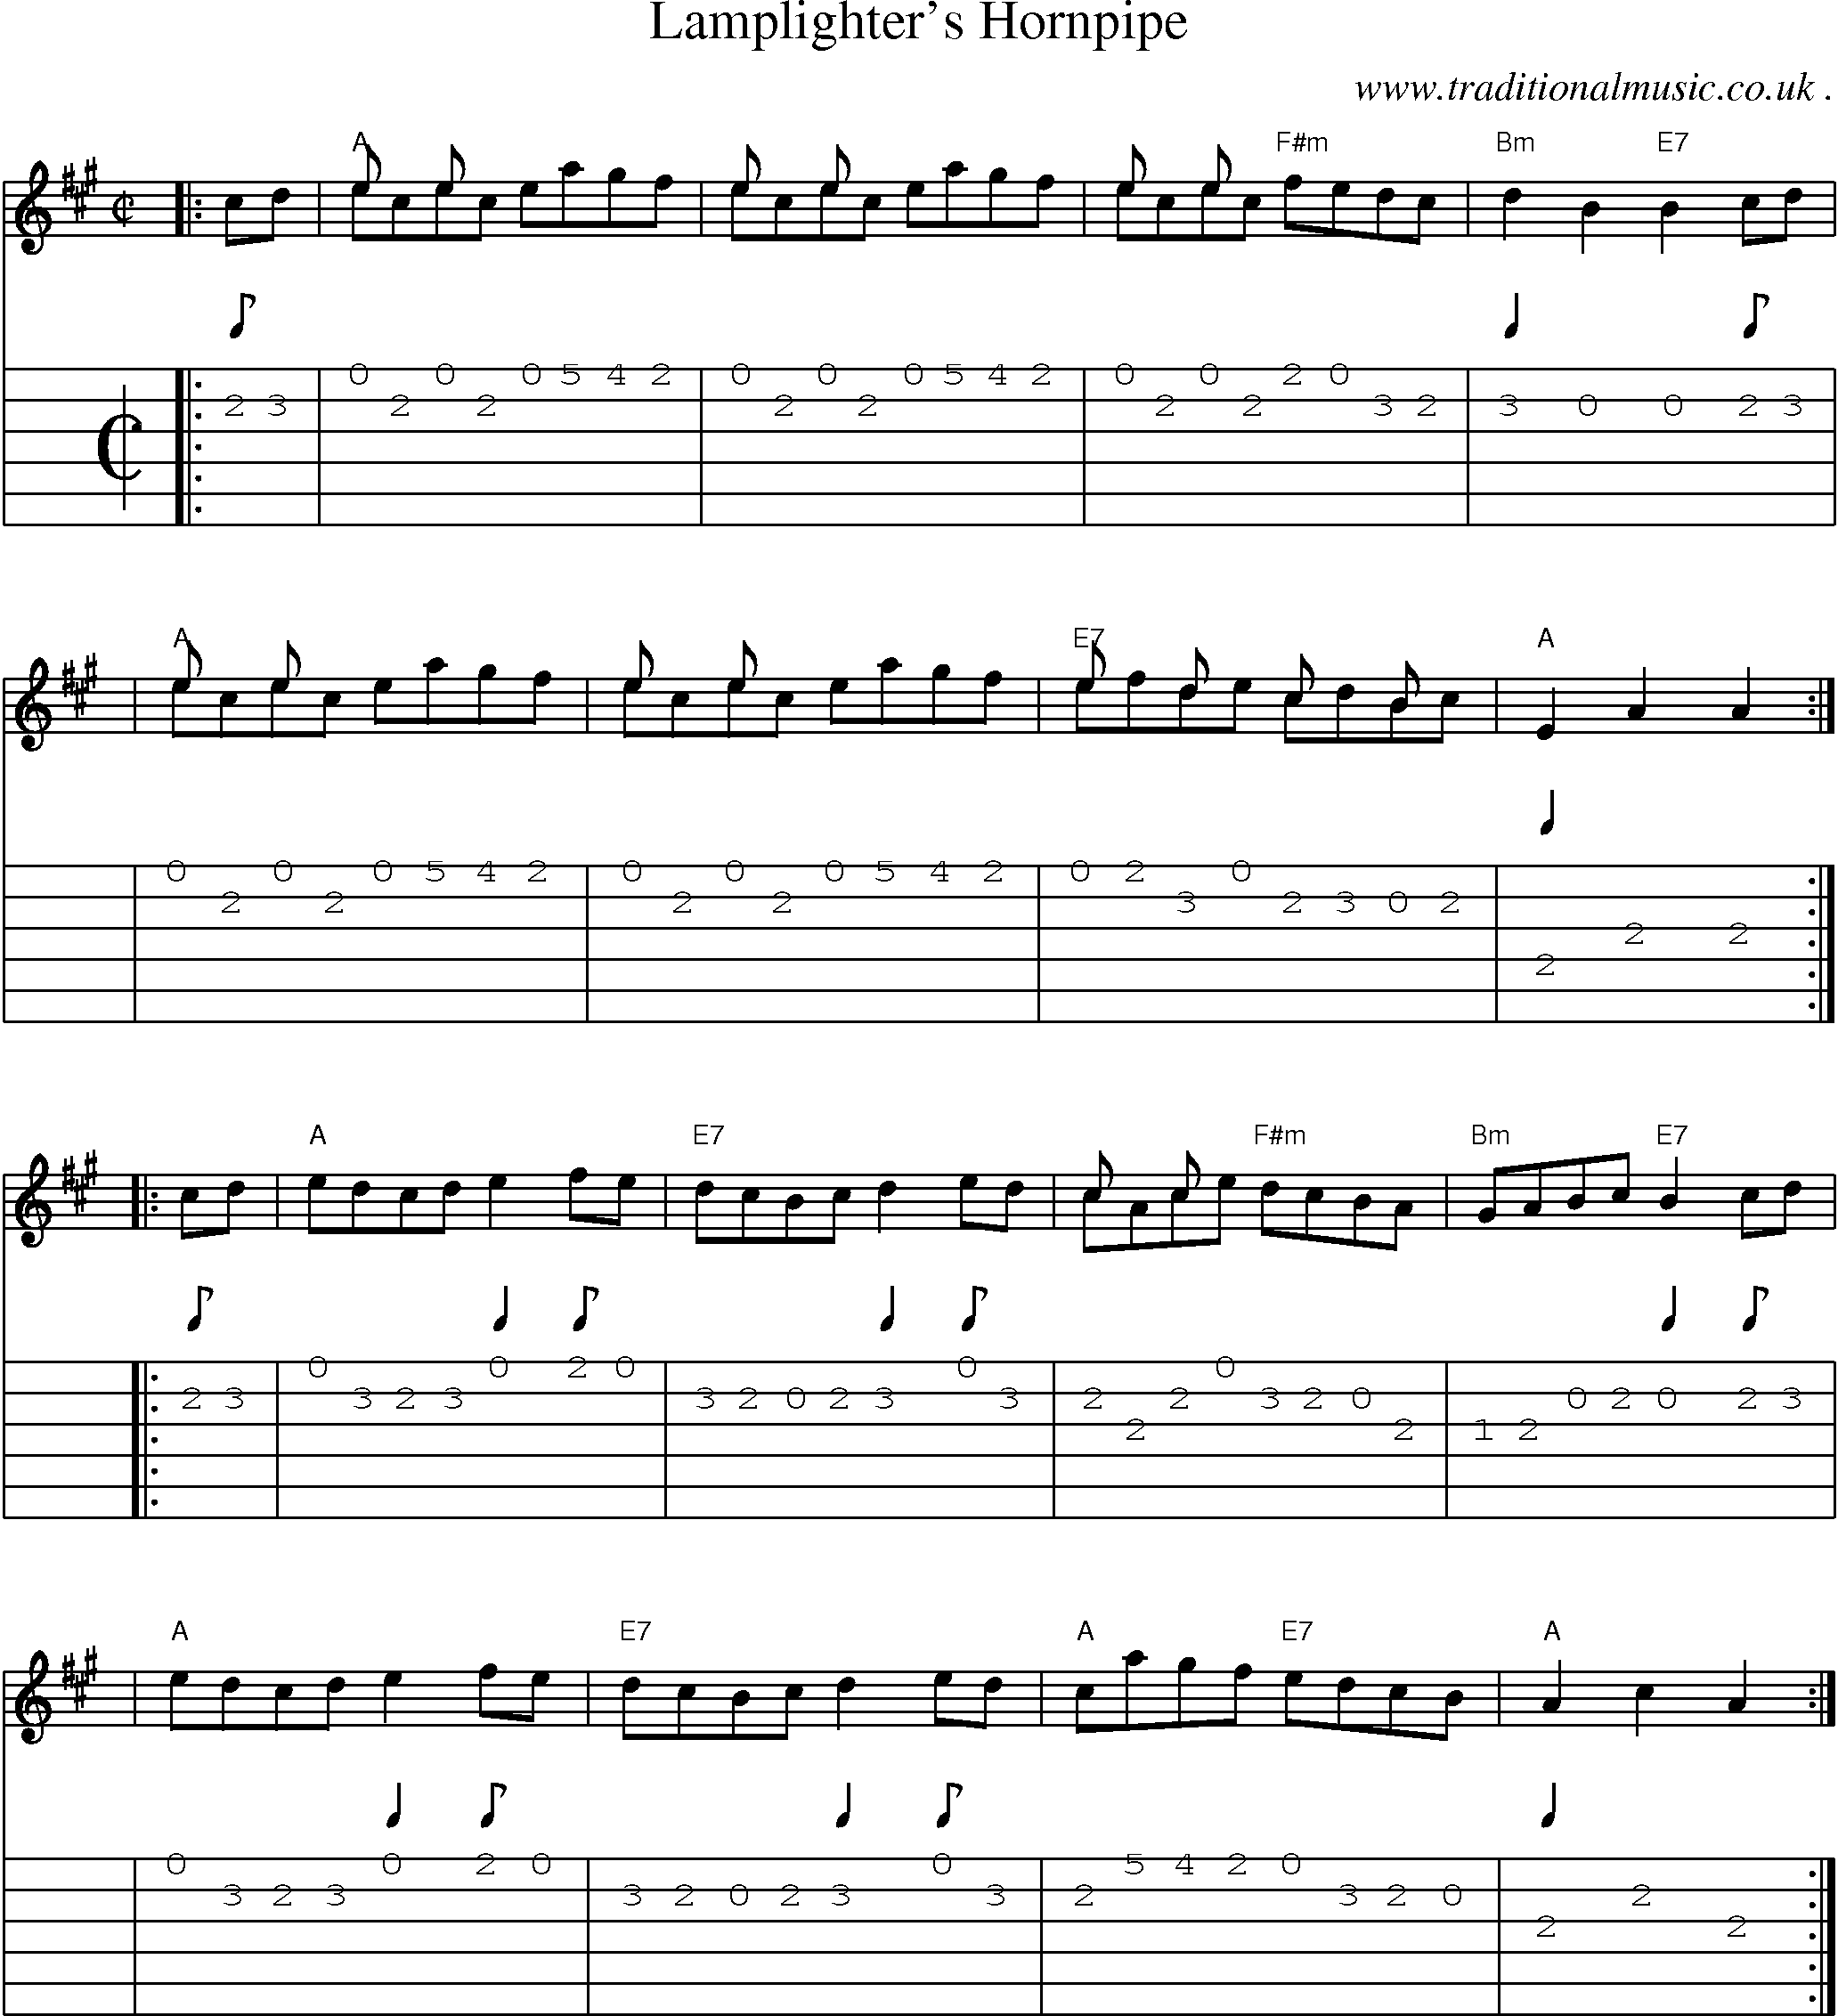 Sheet-music  score, Chords and Guitar Tabs for Lamplighters Hornpipe